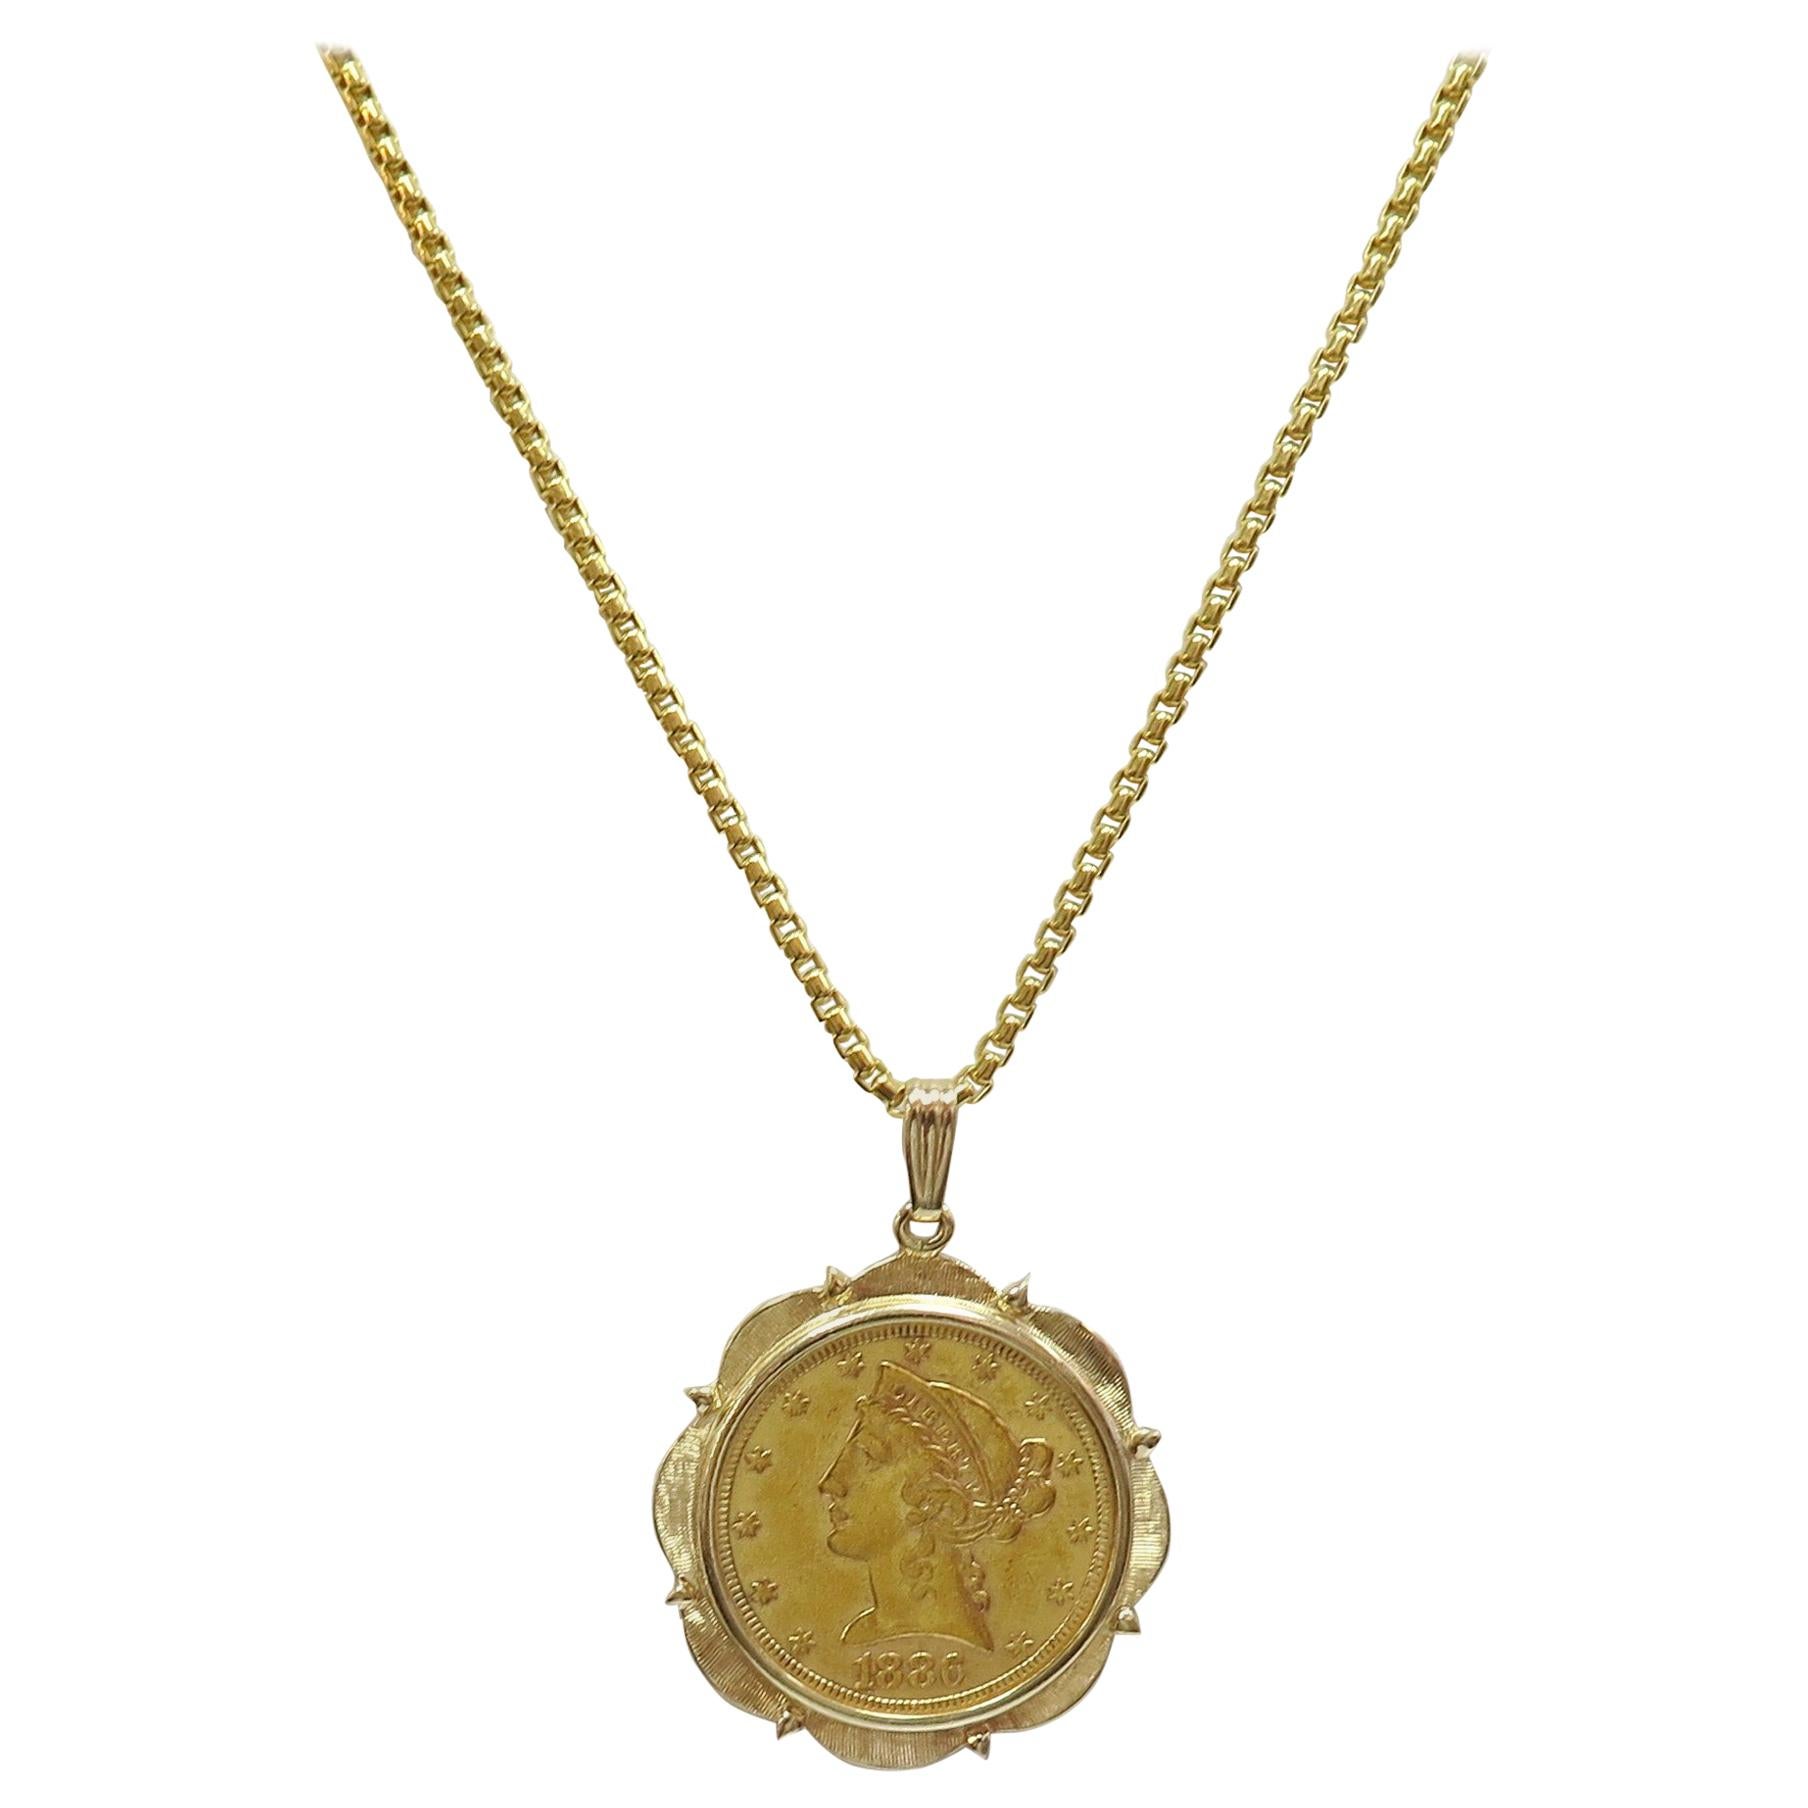 1886 S $5 Gold Liberty Head Coin in 14 Karat Bezel and Chain For Sale